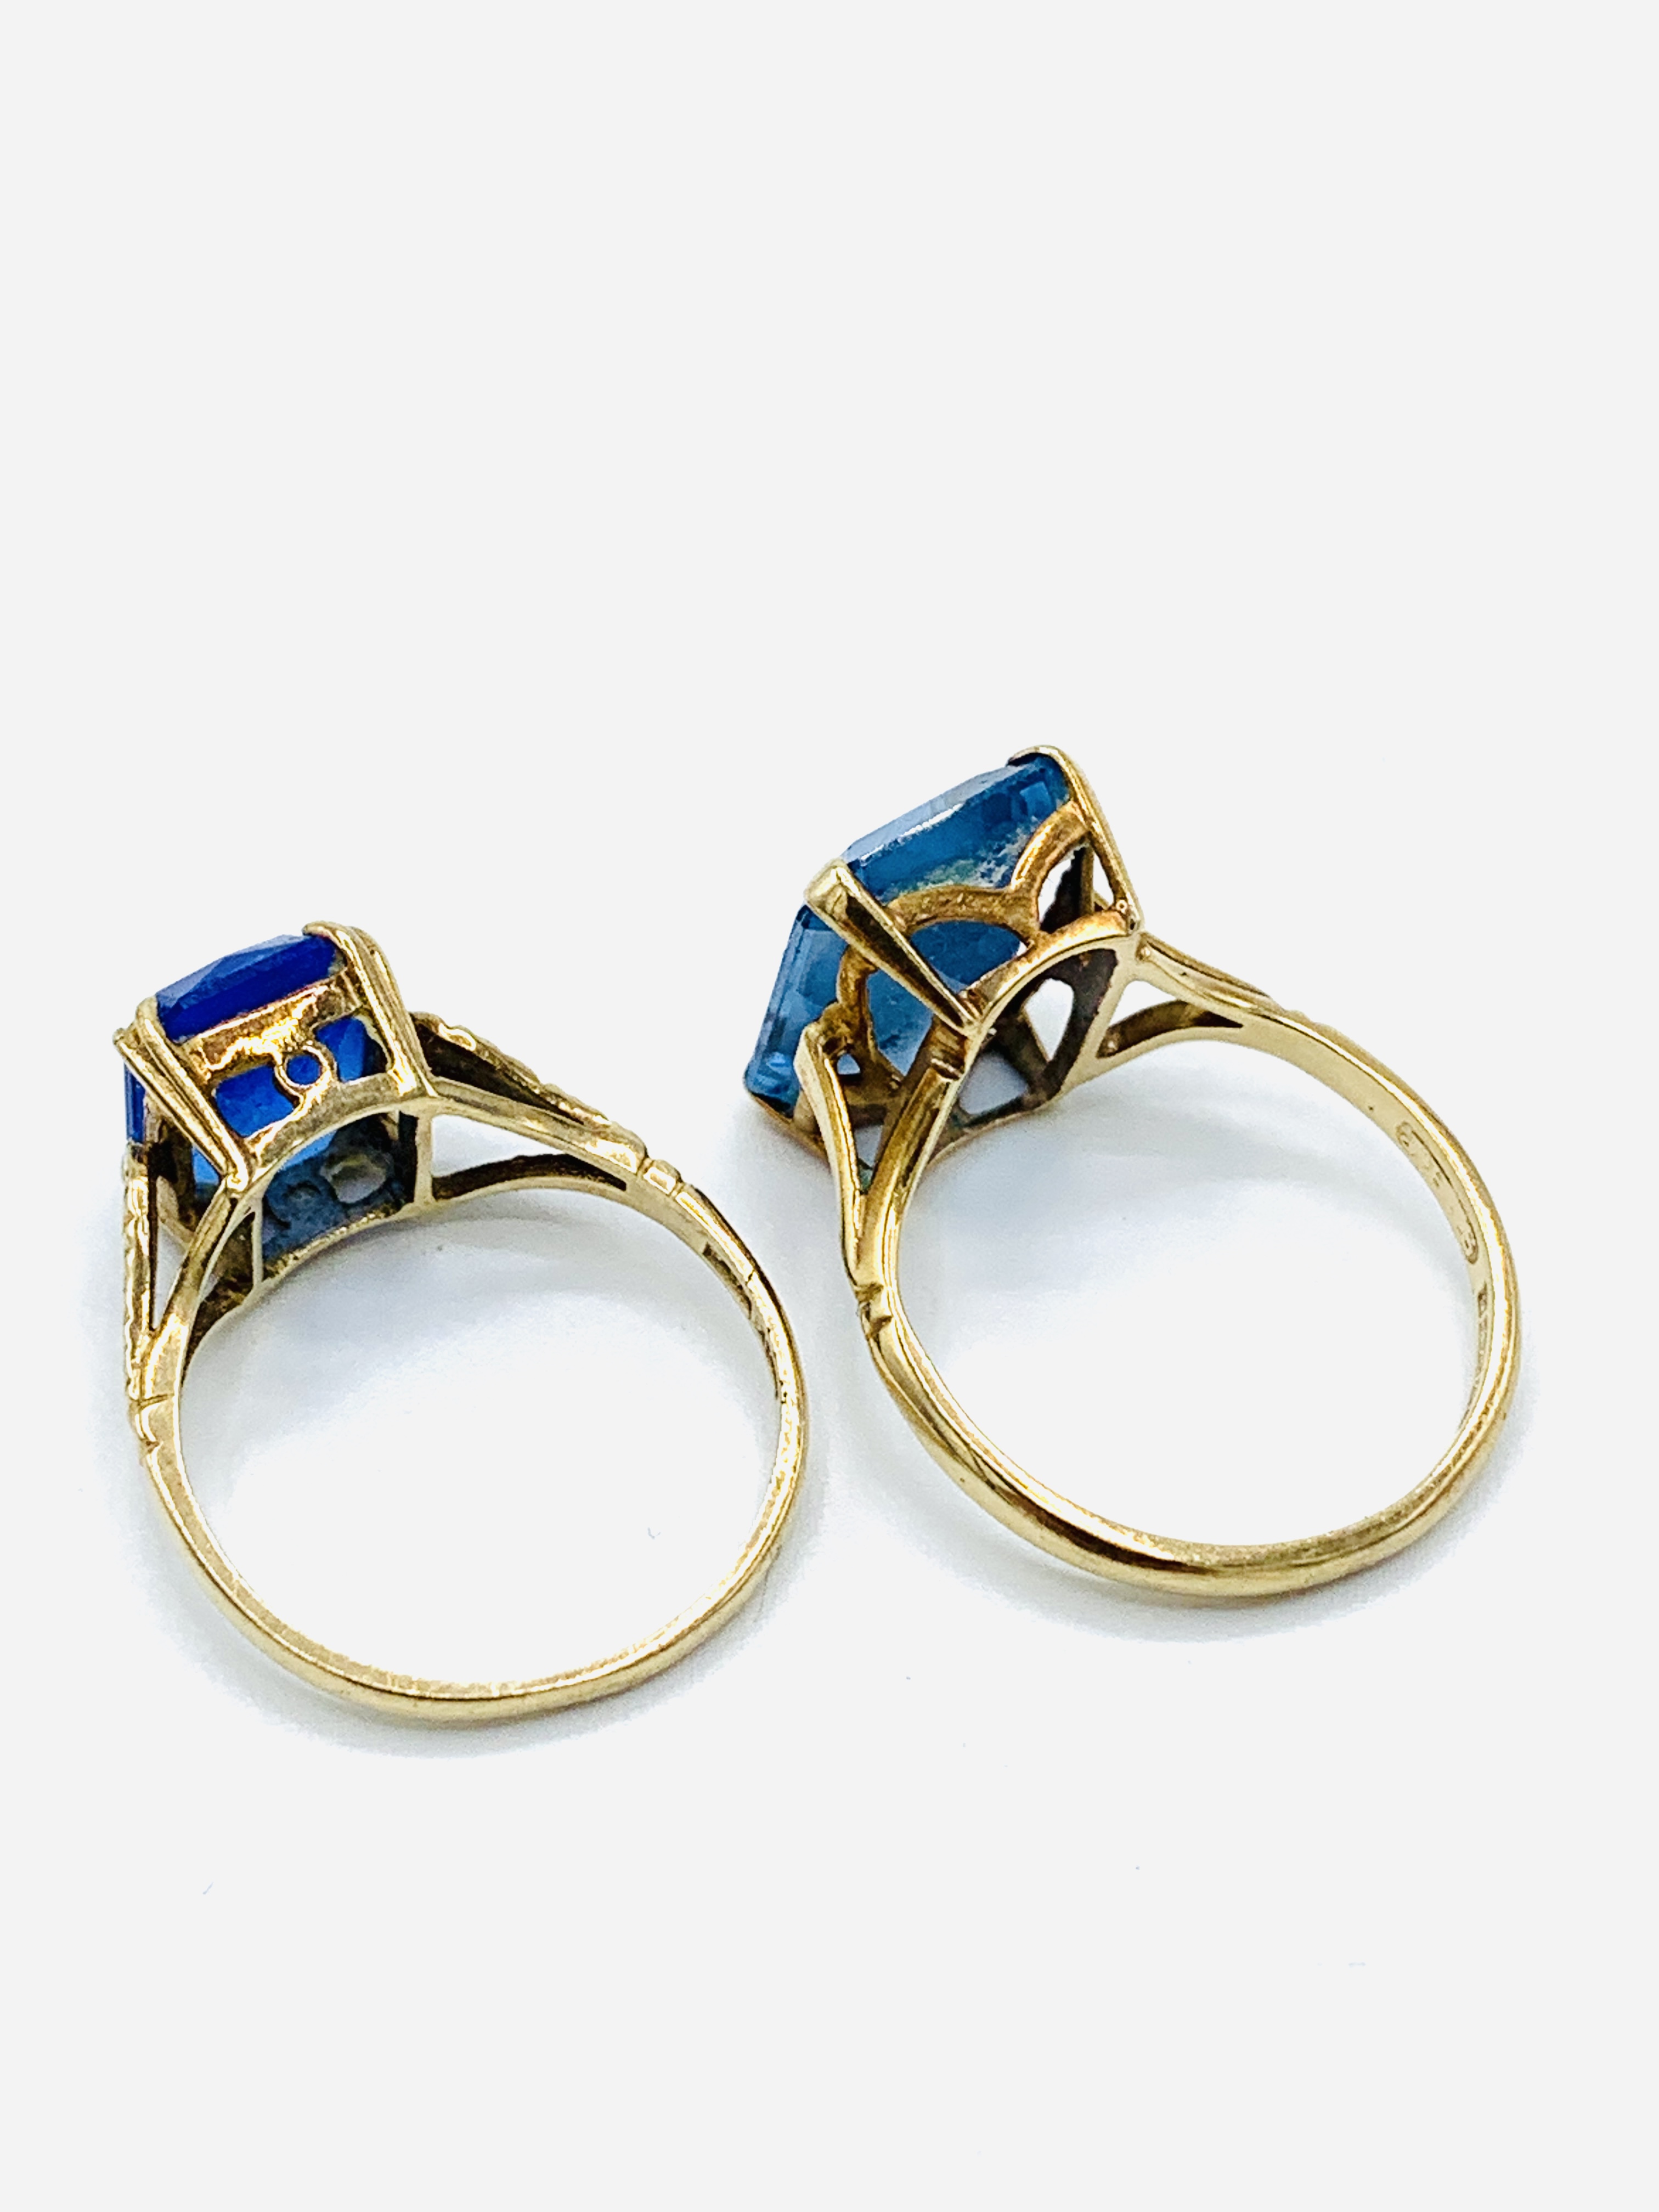 Two 9ct gold rings - Image 3 of 5